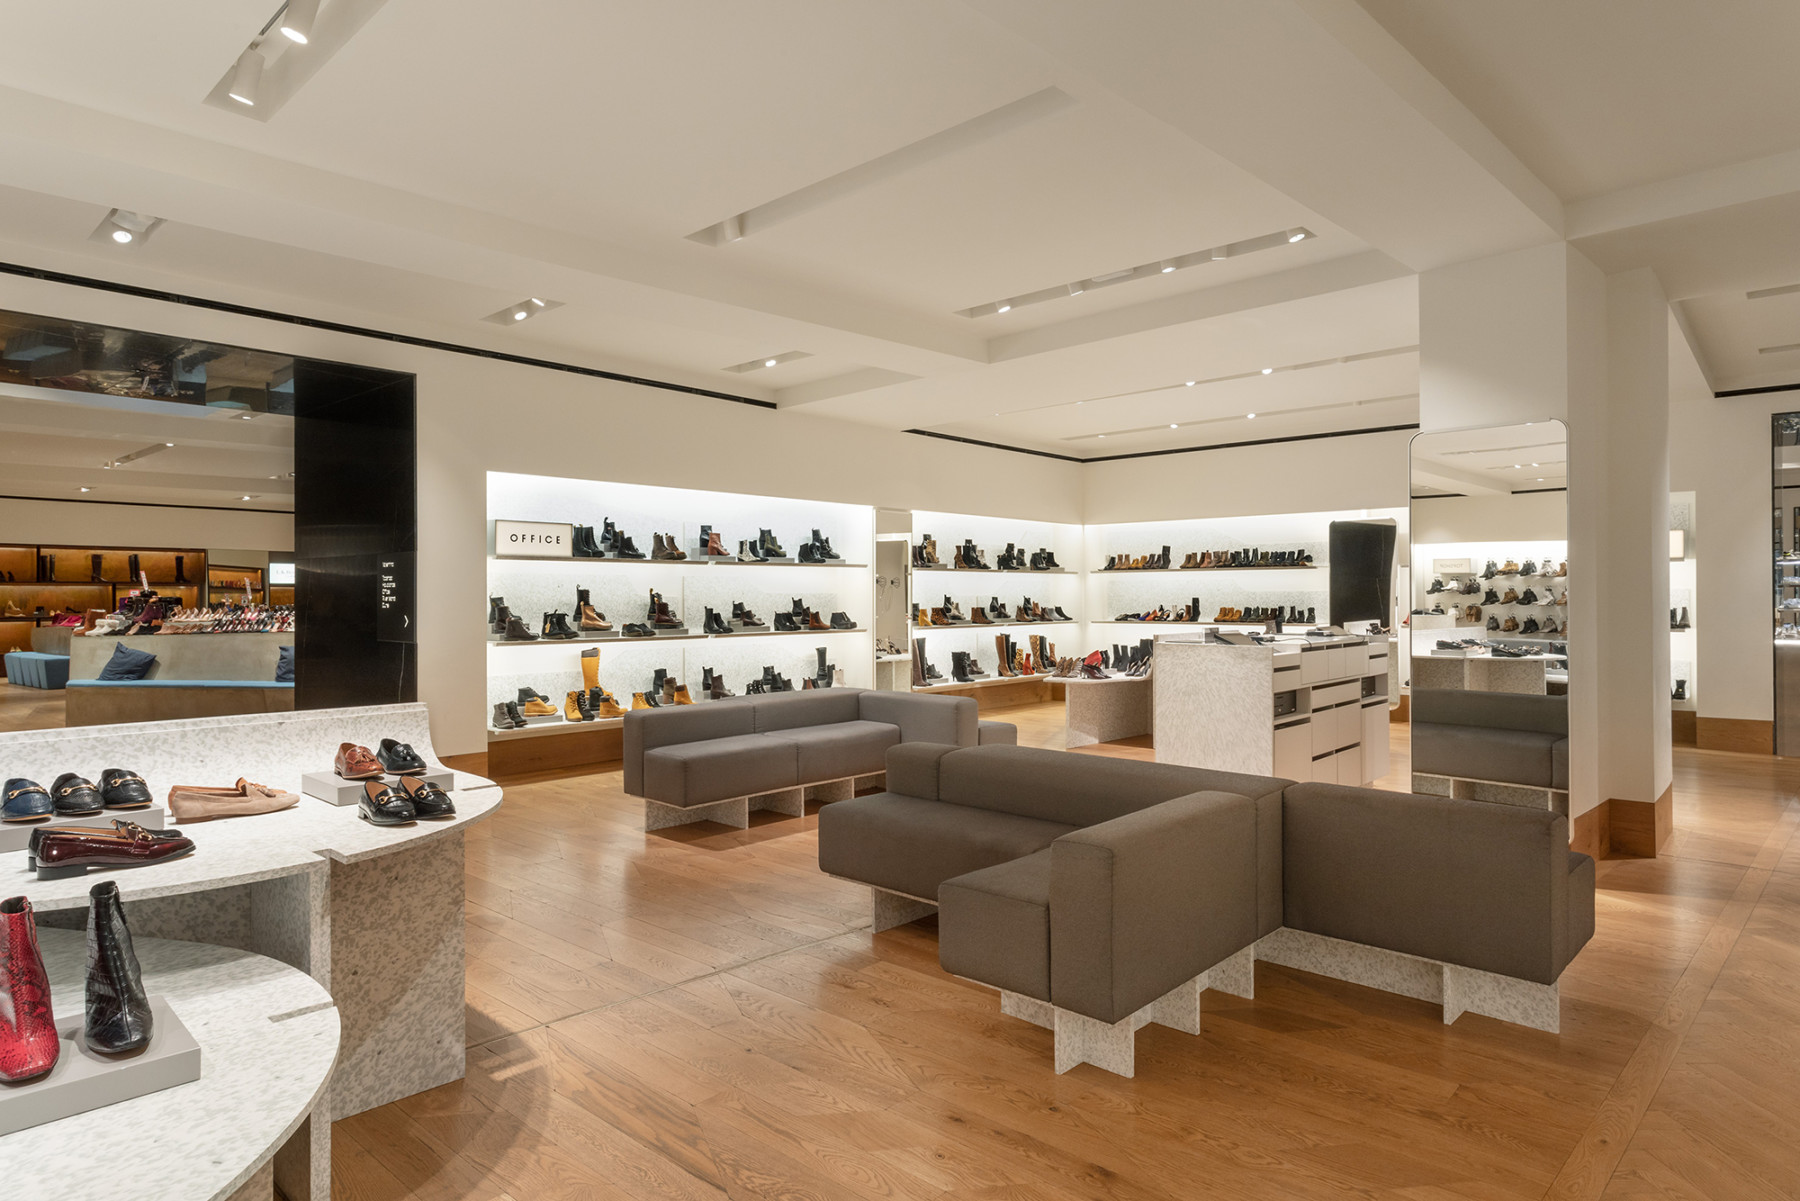 jamie-fobert-architects-selfridges-shoe-galleries-luxury-retail-concept-gallery-2-recycled